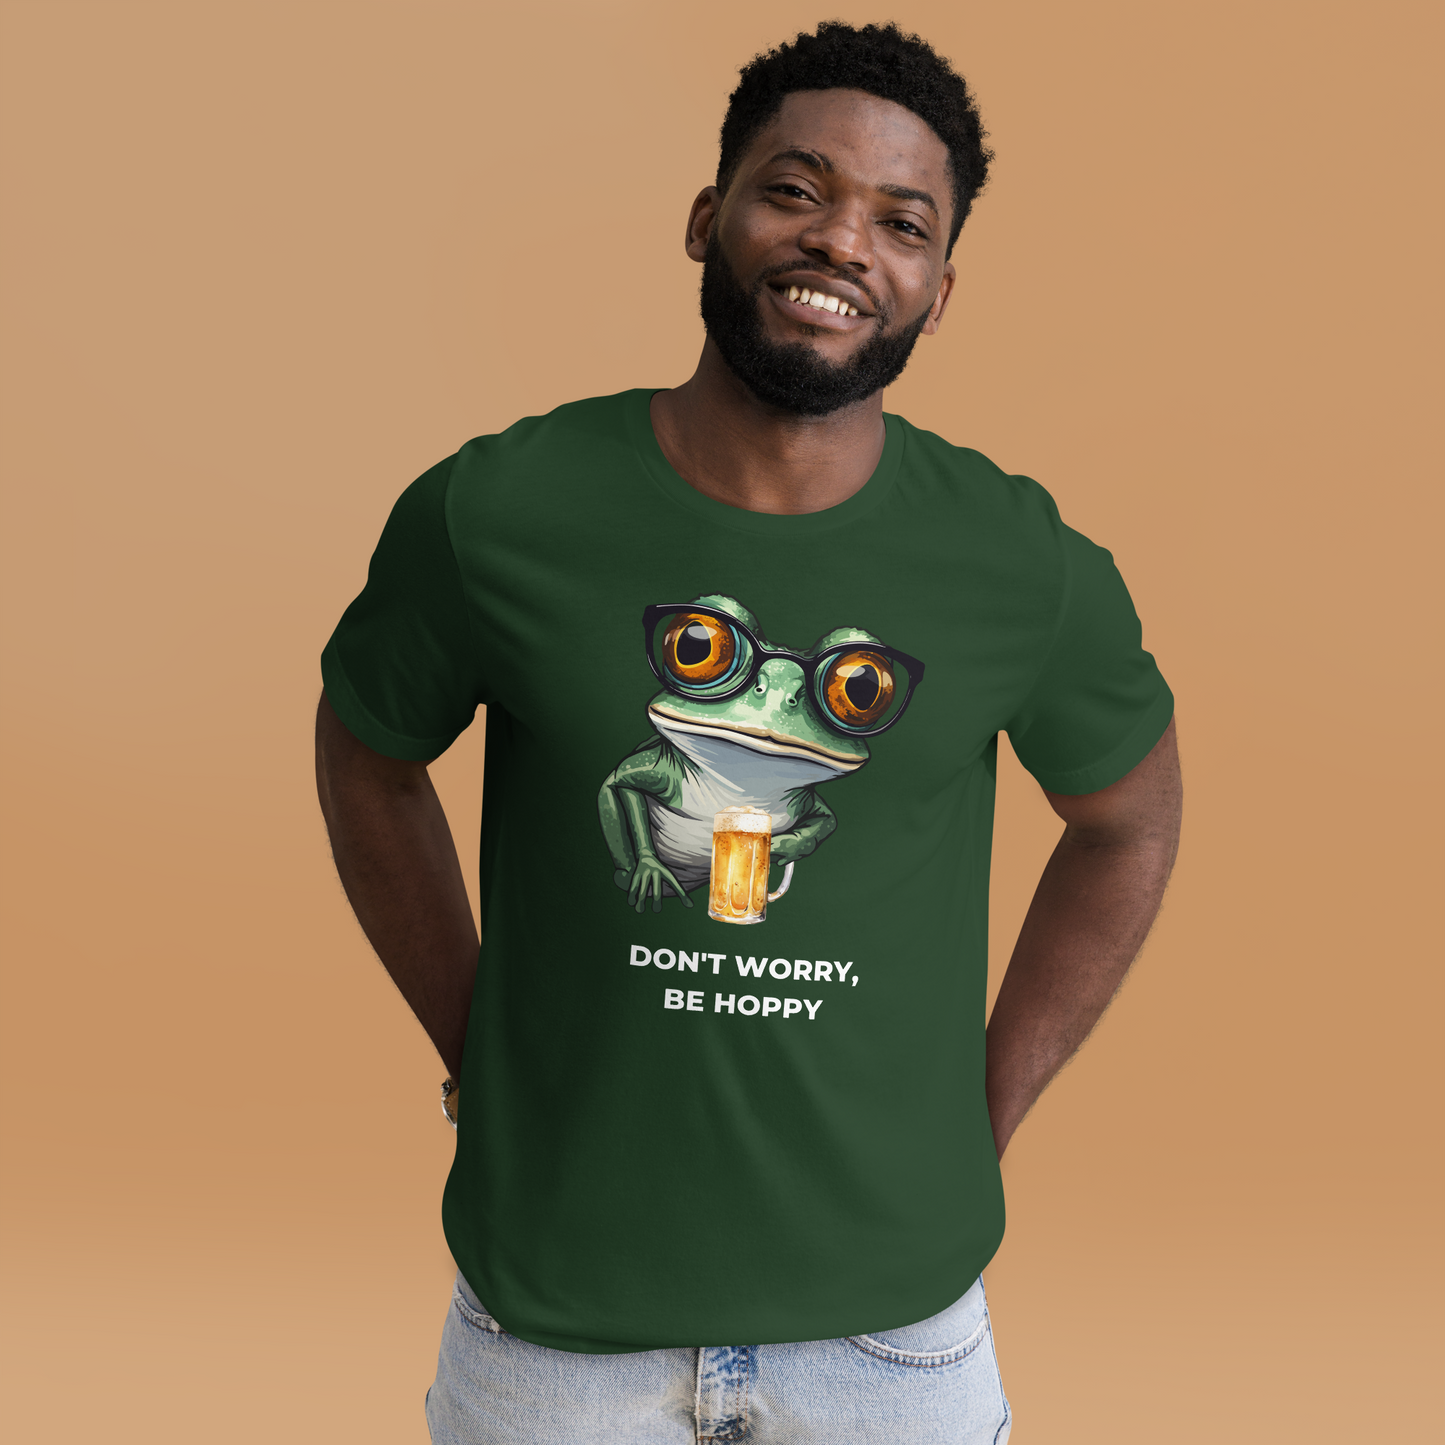 Smiling man wearing a Forest Green Premium Frog Tee featuring a funny Don't Worry, Be Hoppy graphic on the chest - Funny Graphic Frog Tees - Boozy Fox